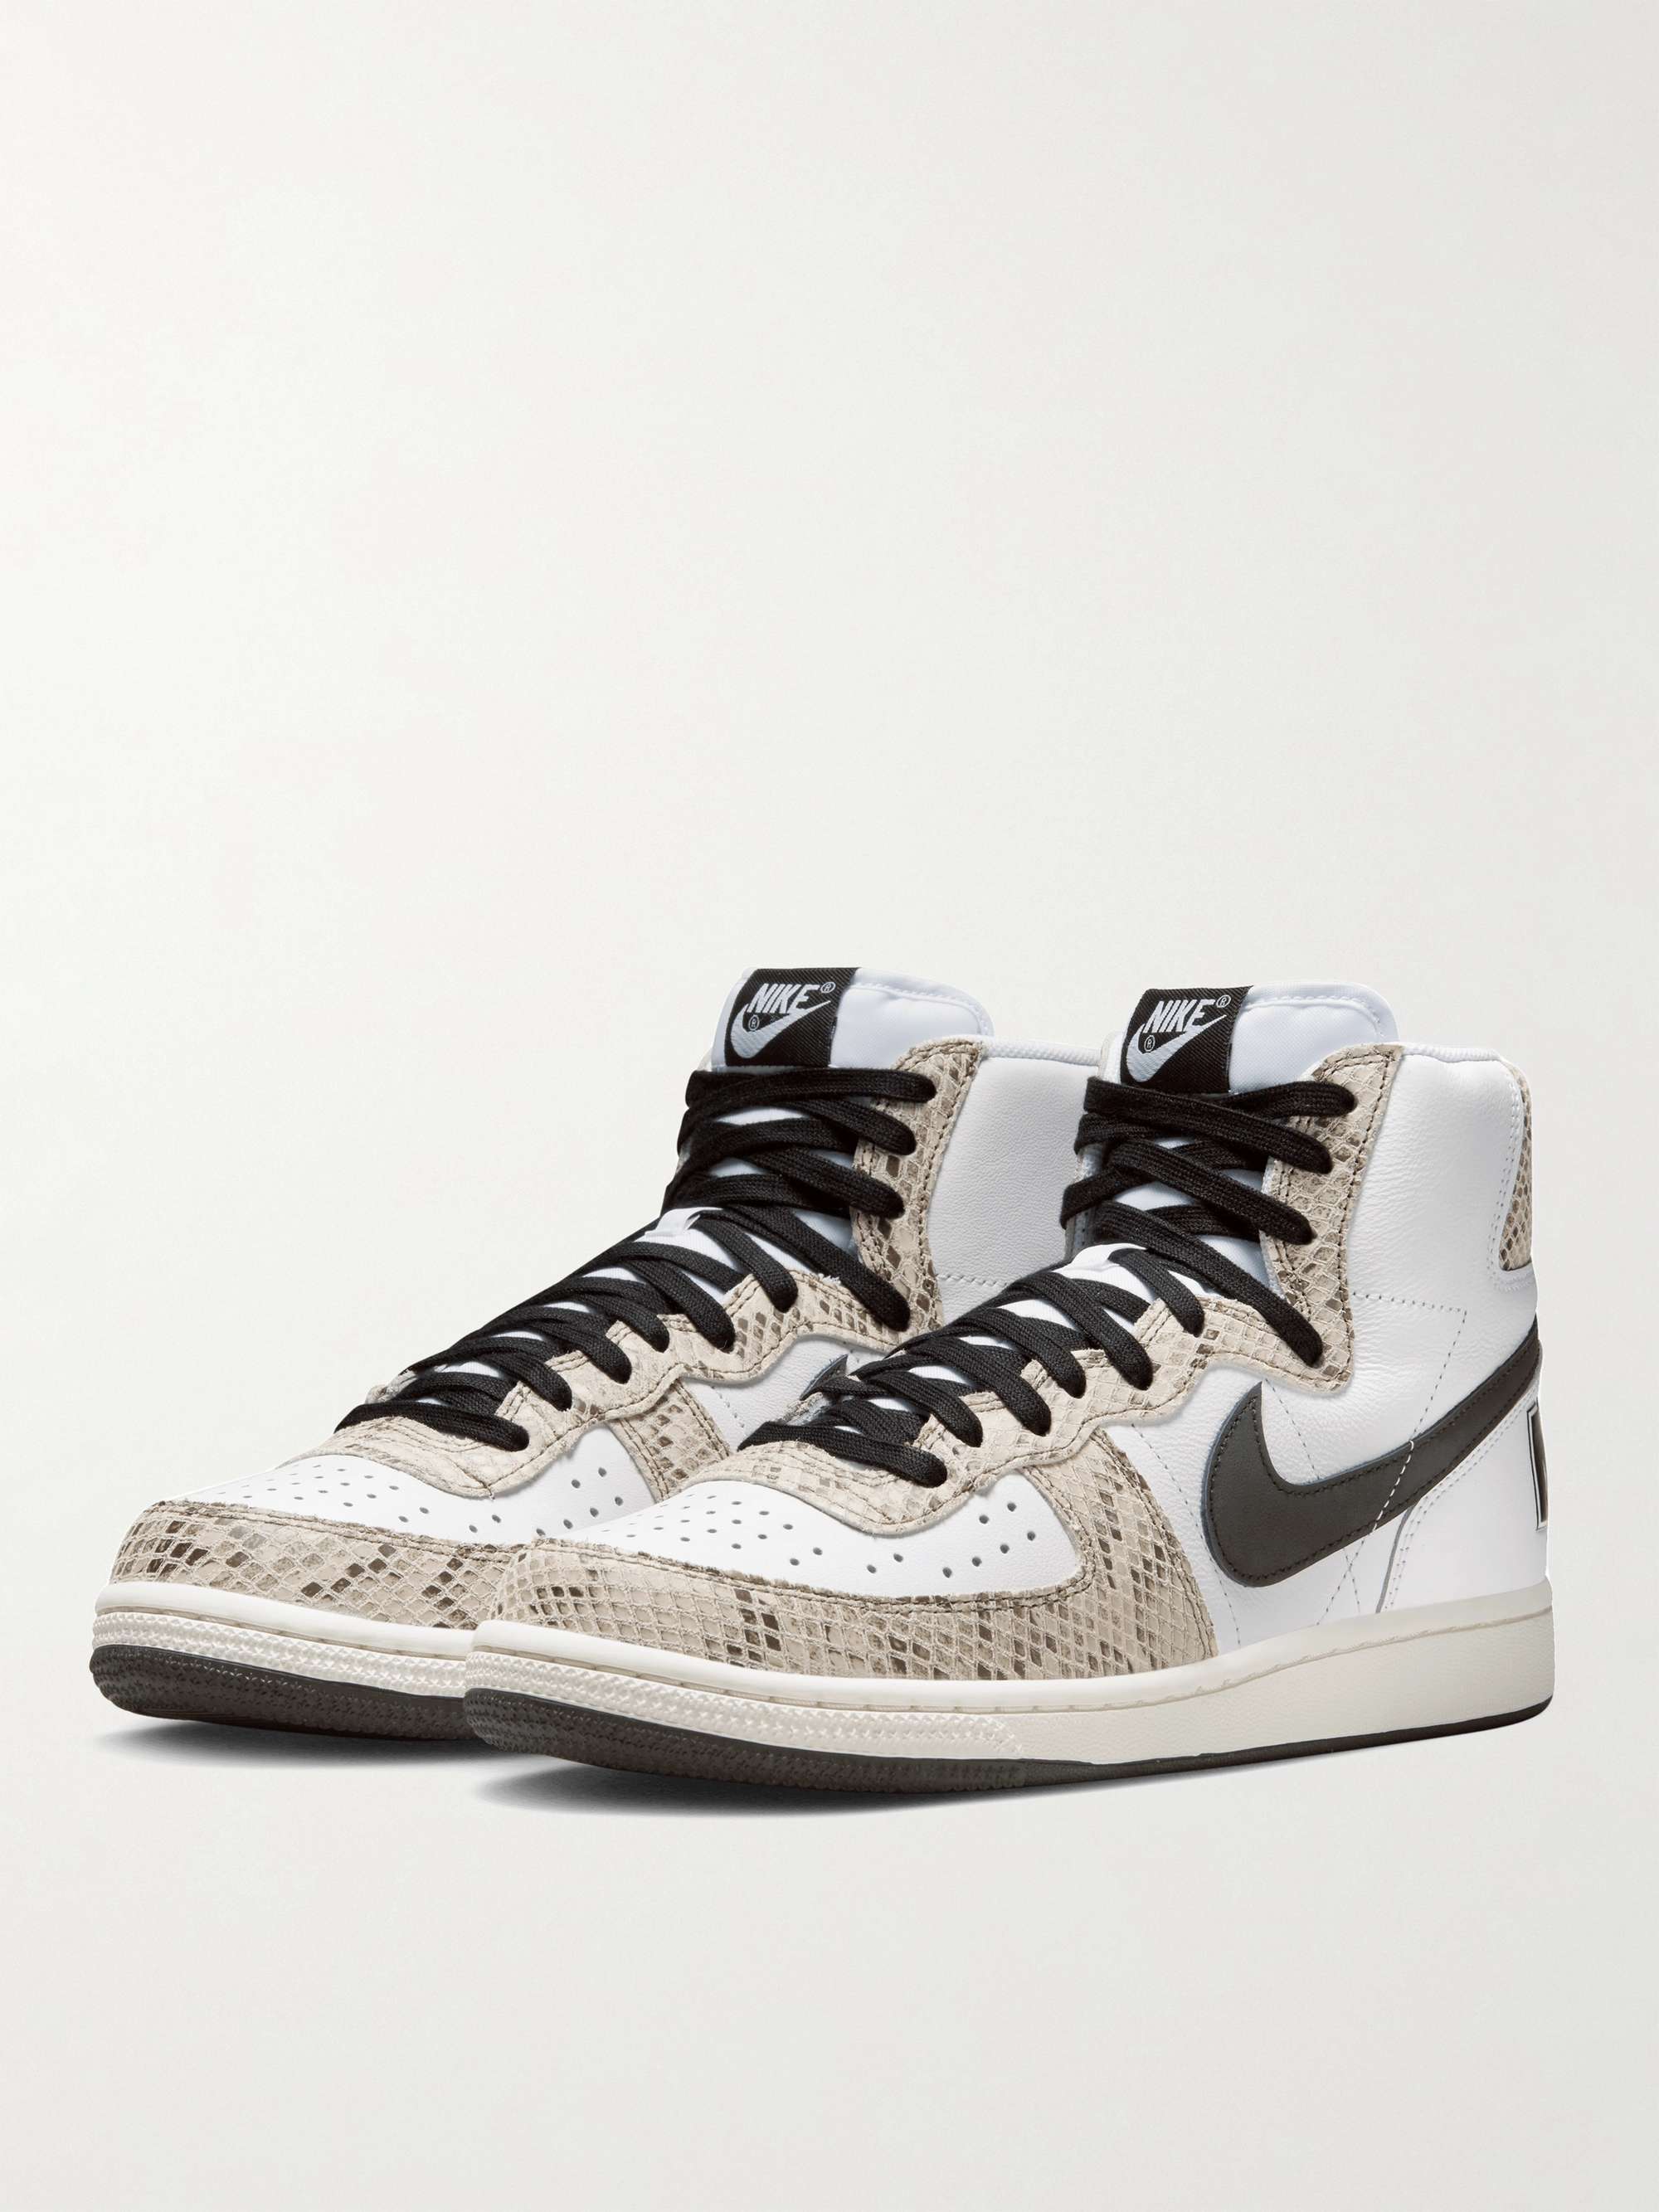 NIKE Terminator High Snake-Effect Leather High-Top Sneakers